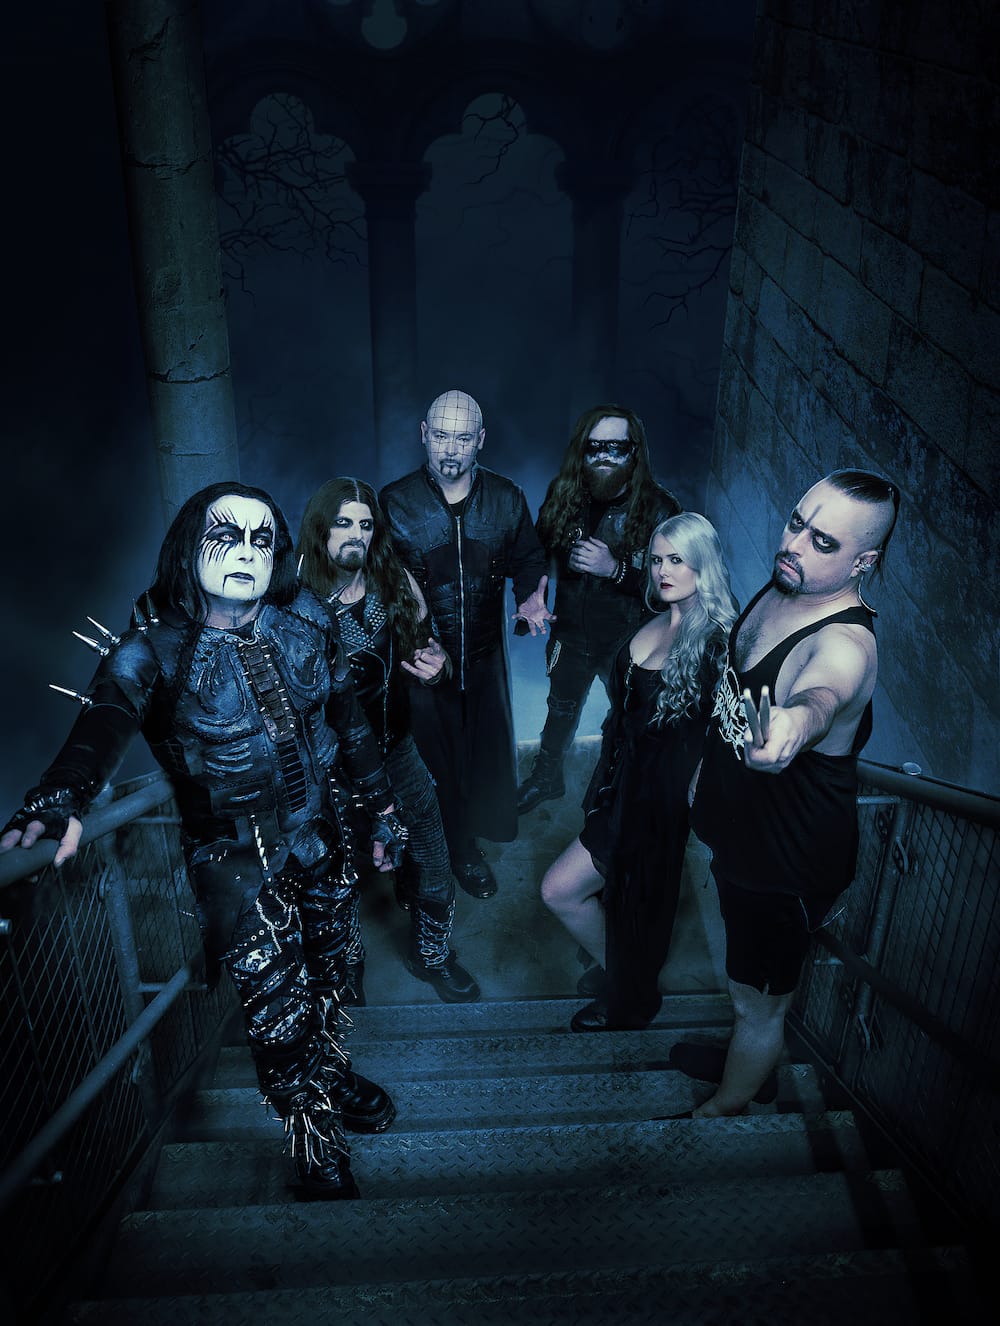 INTERVIEW: CRADLE OF FILTH Frontman DANI FILTH Talks About Their Upcoming Australian Tour, New Band Members, Eclectic Collabs + More